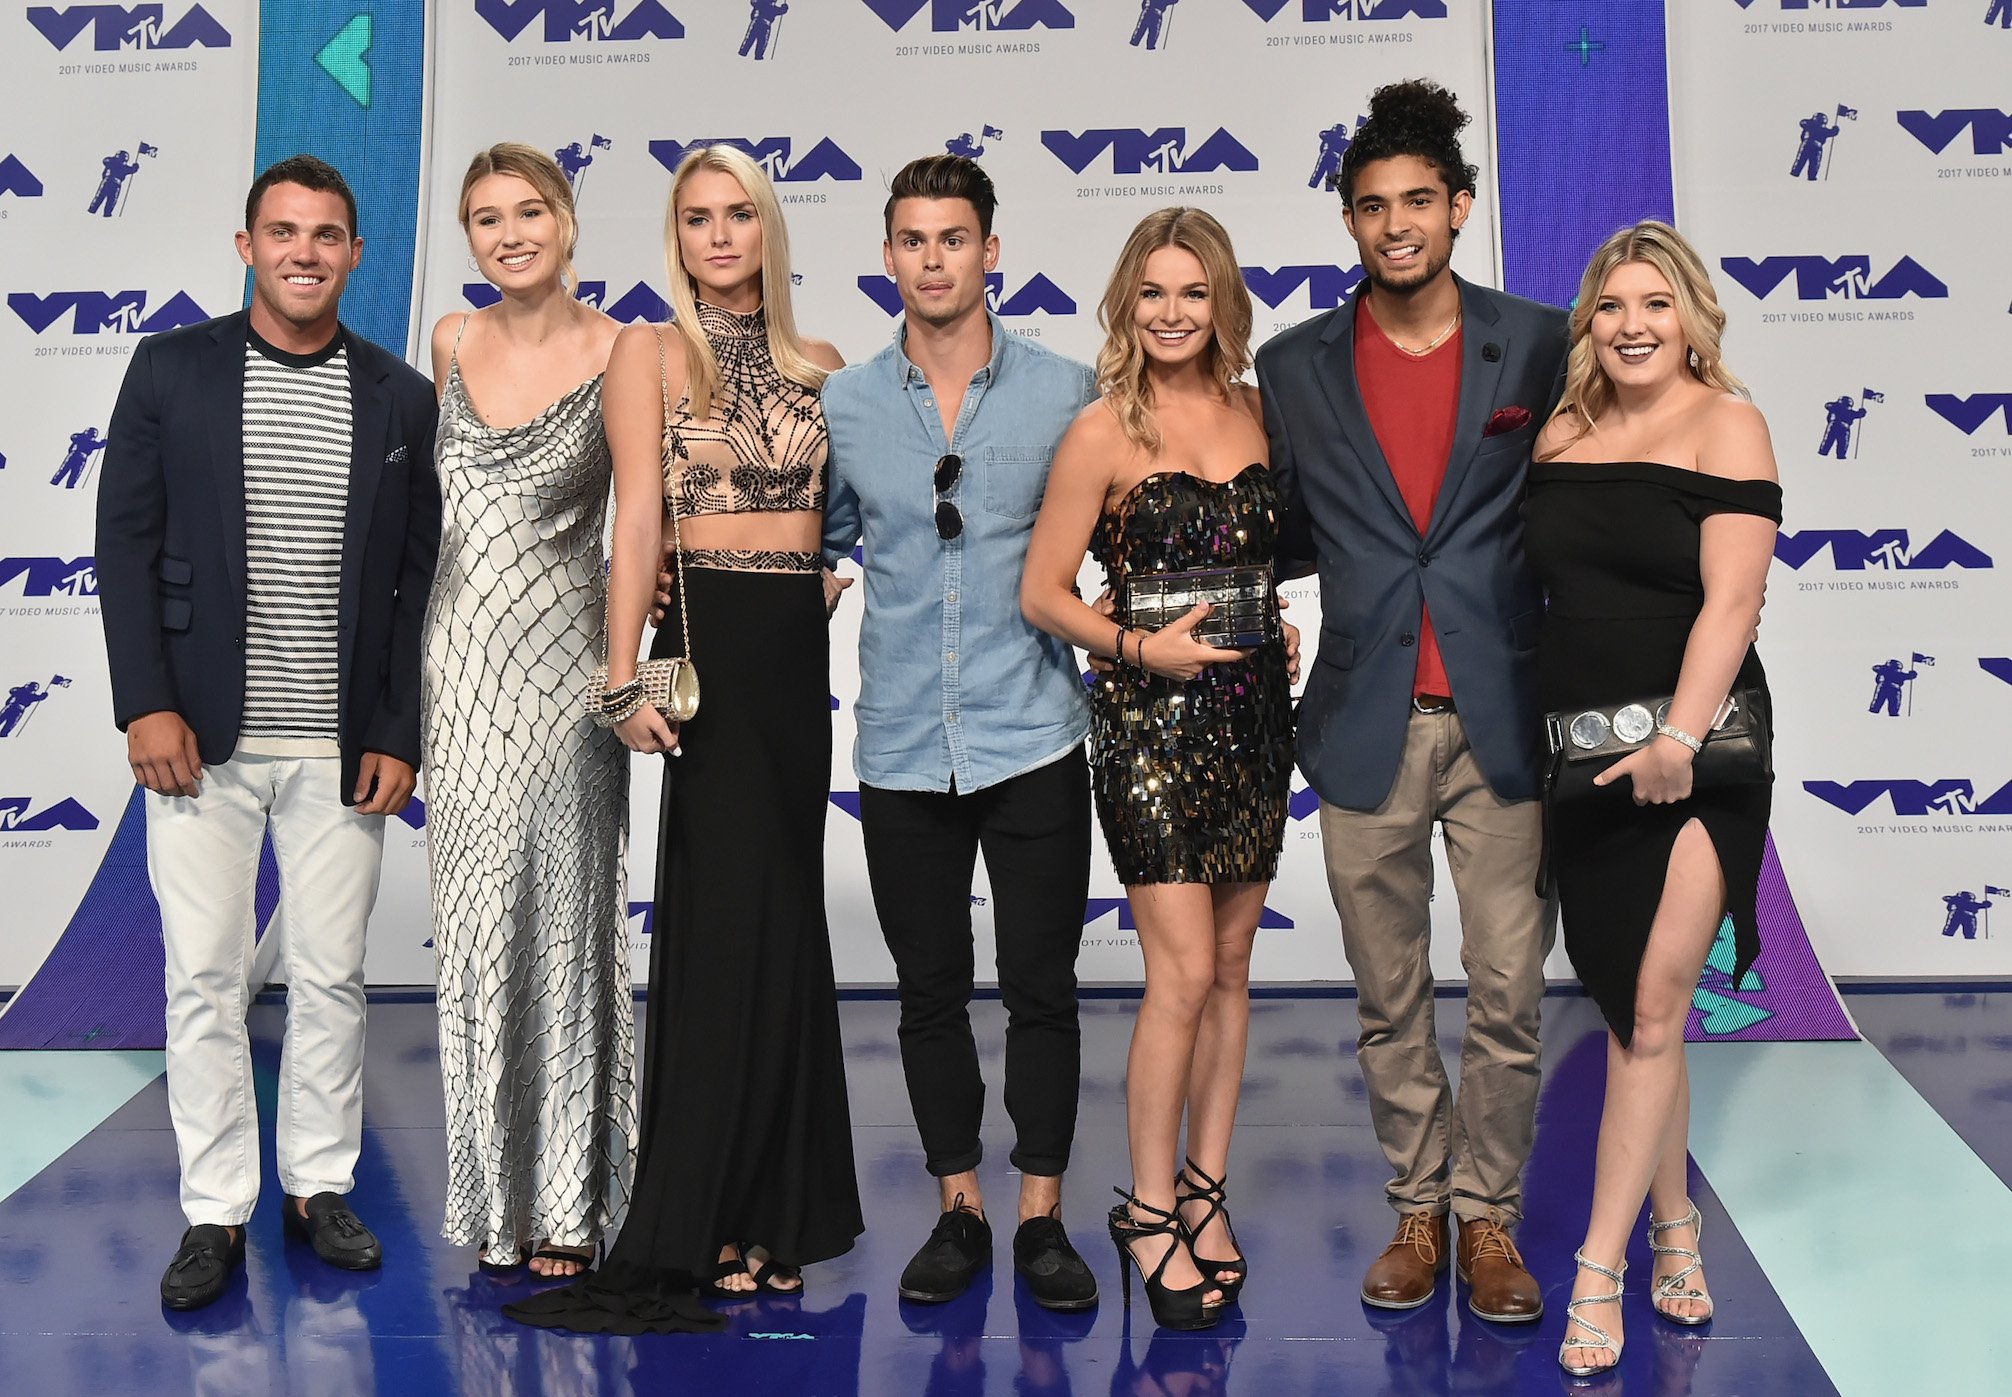 The cast of 'Siesta Key' arrives at the MTV Video Music Awards